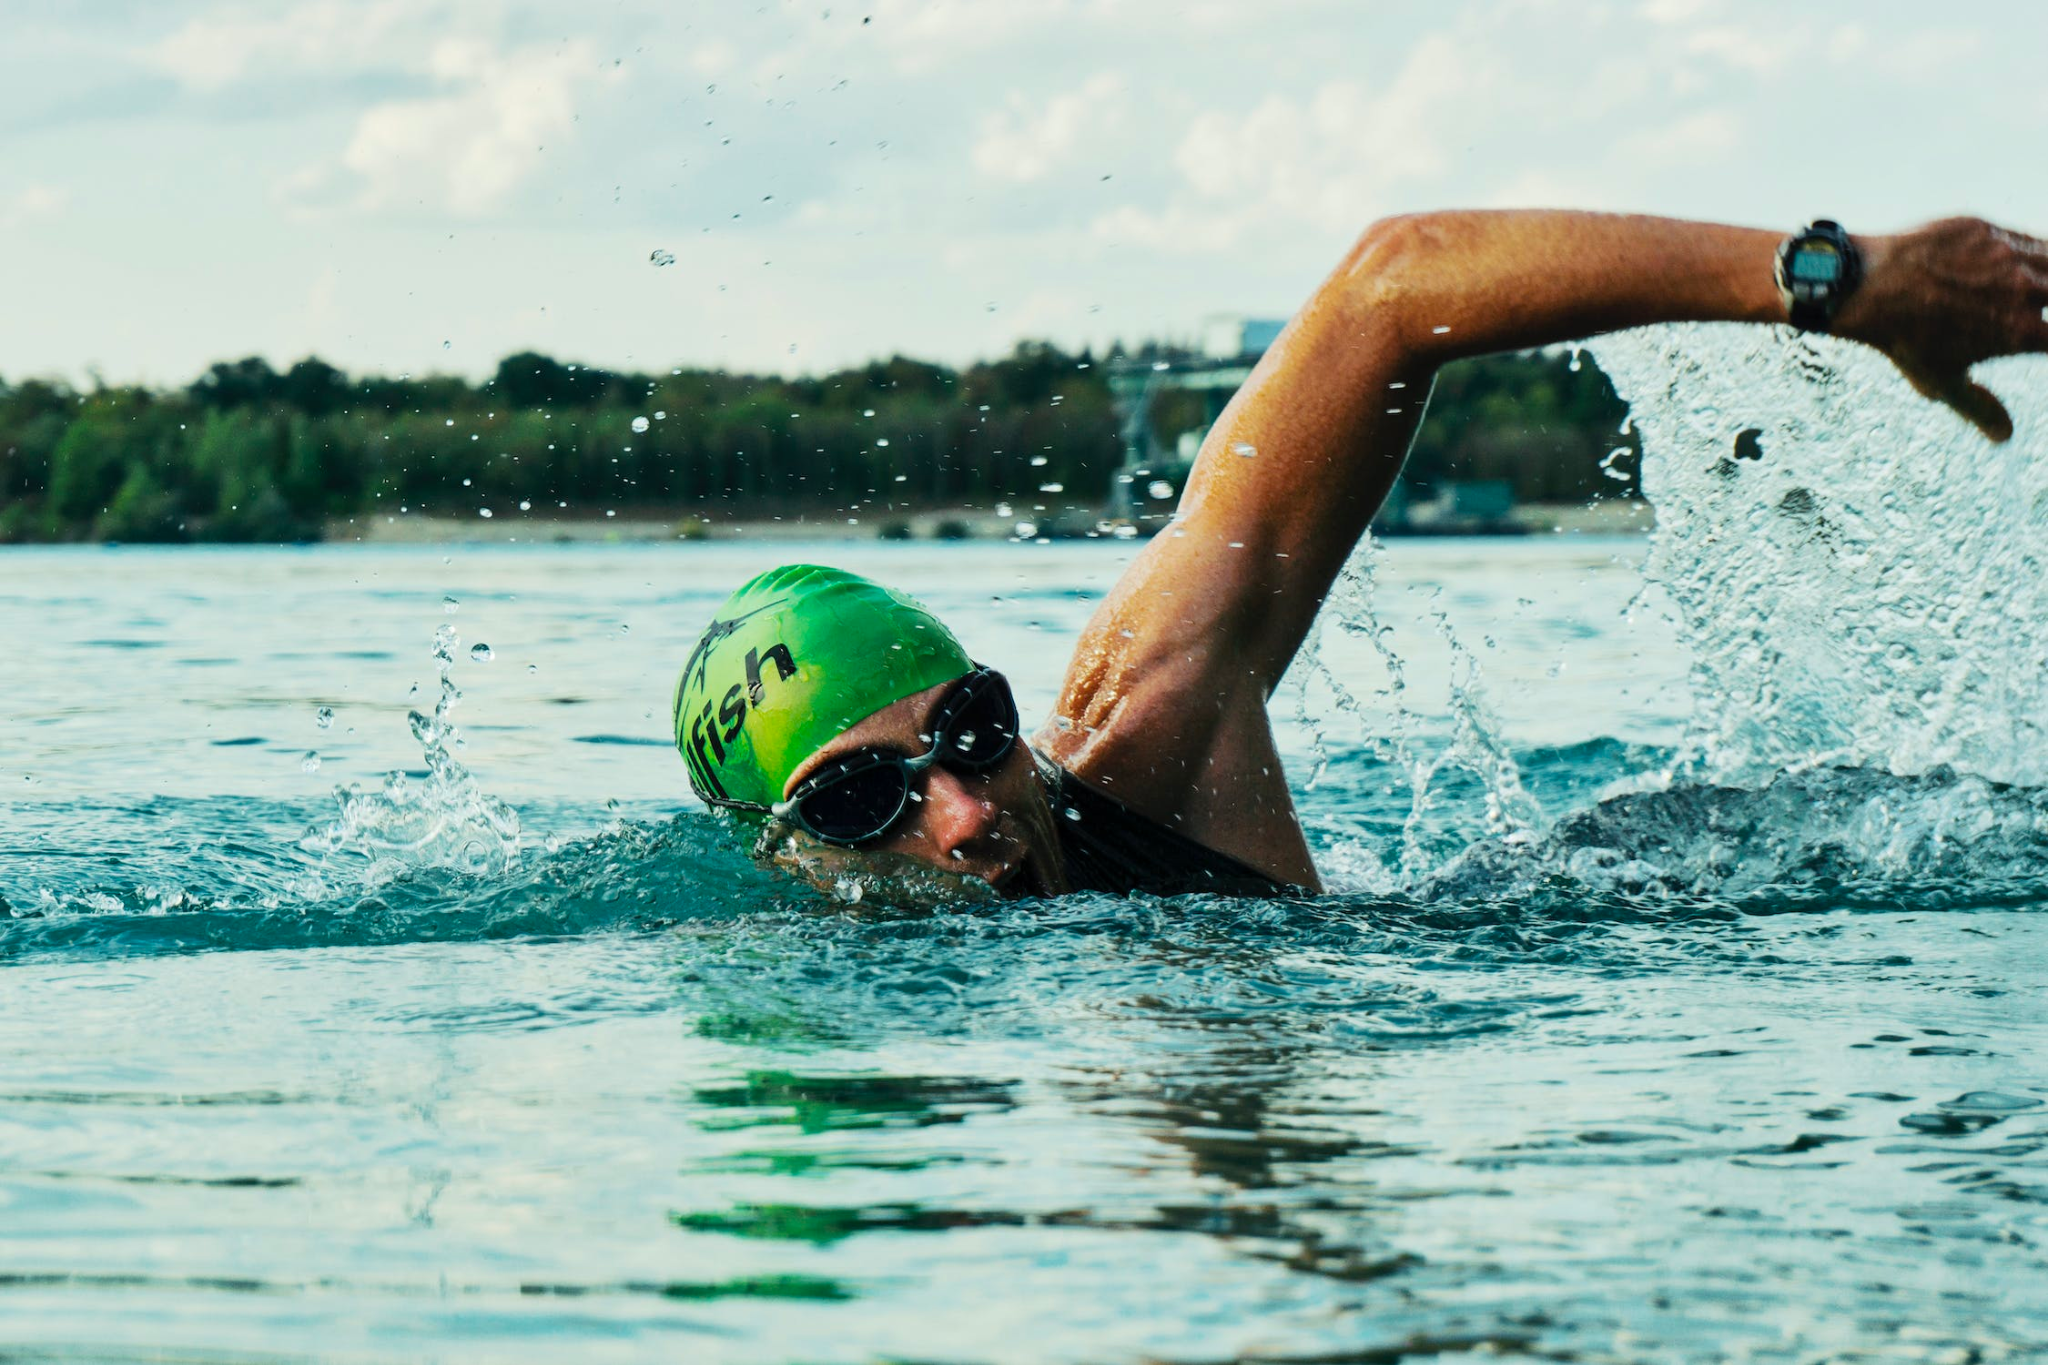 A swimmer photographed mid-stroke in a lake.